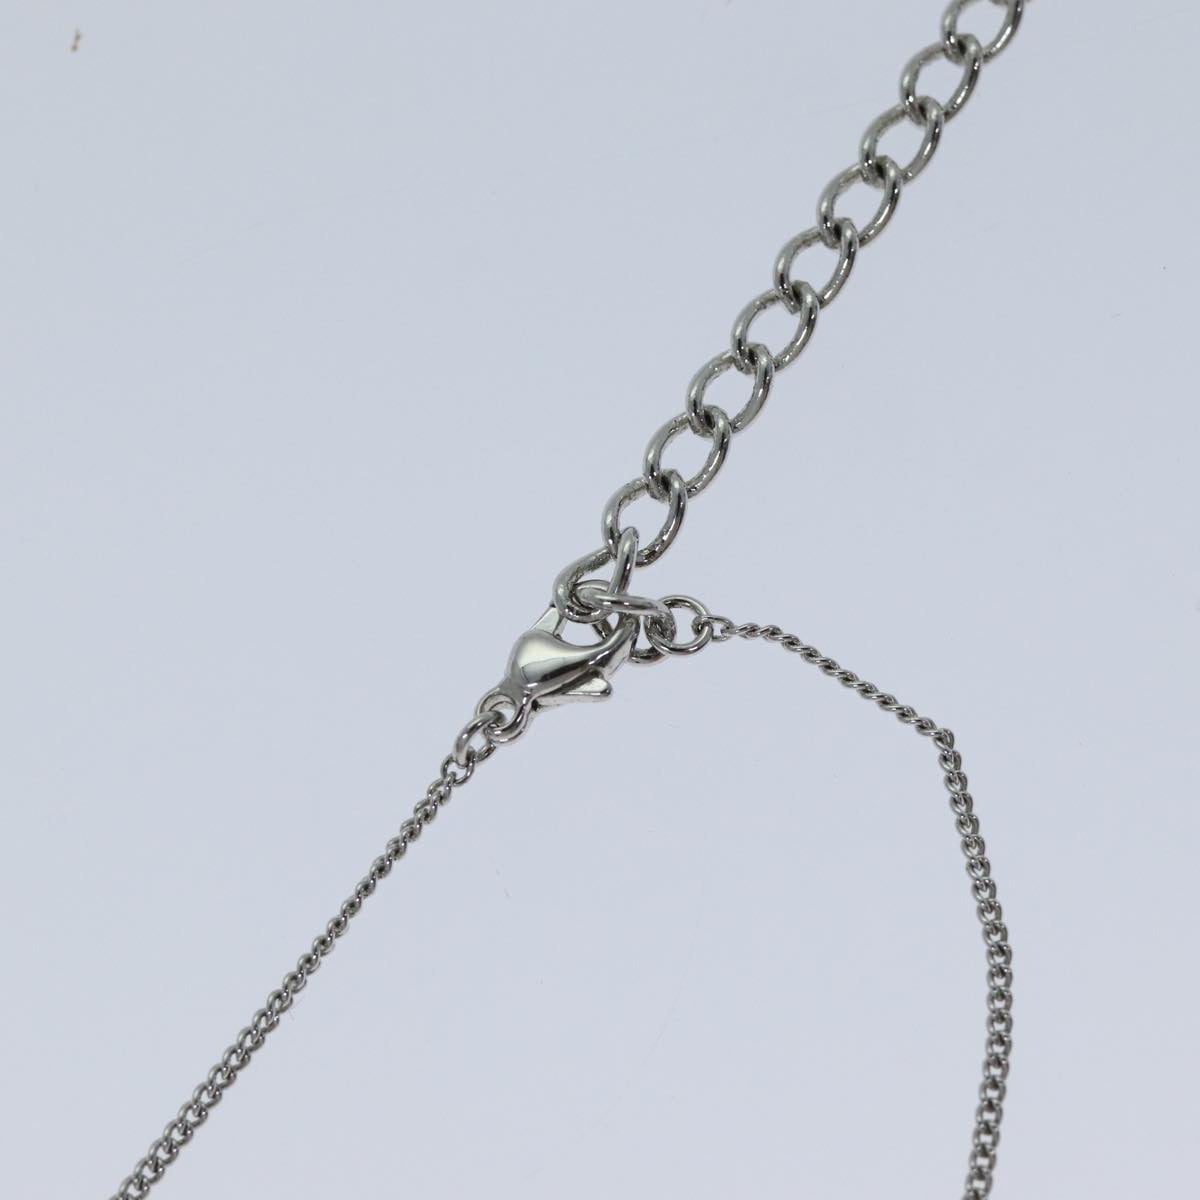 Christian Dior Necklace metal Silver Auth yk12528